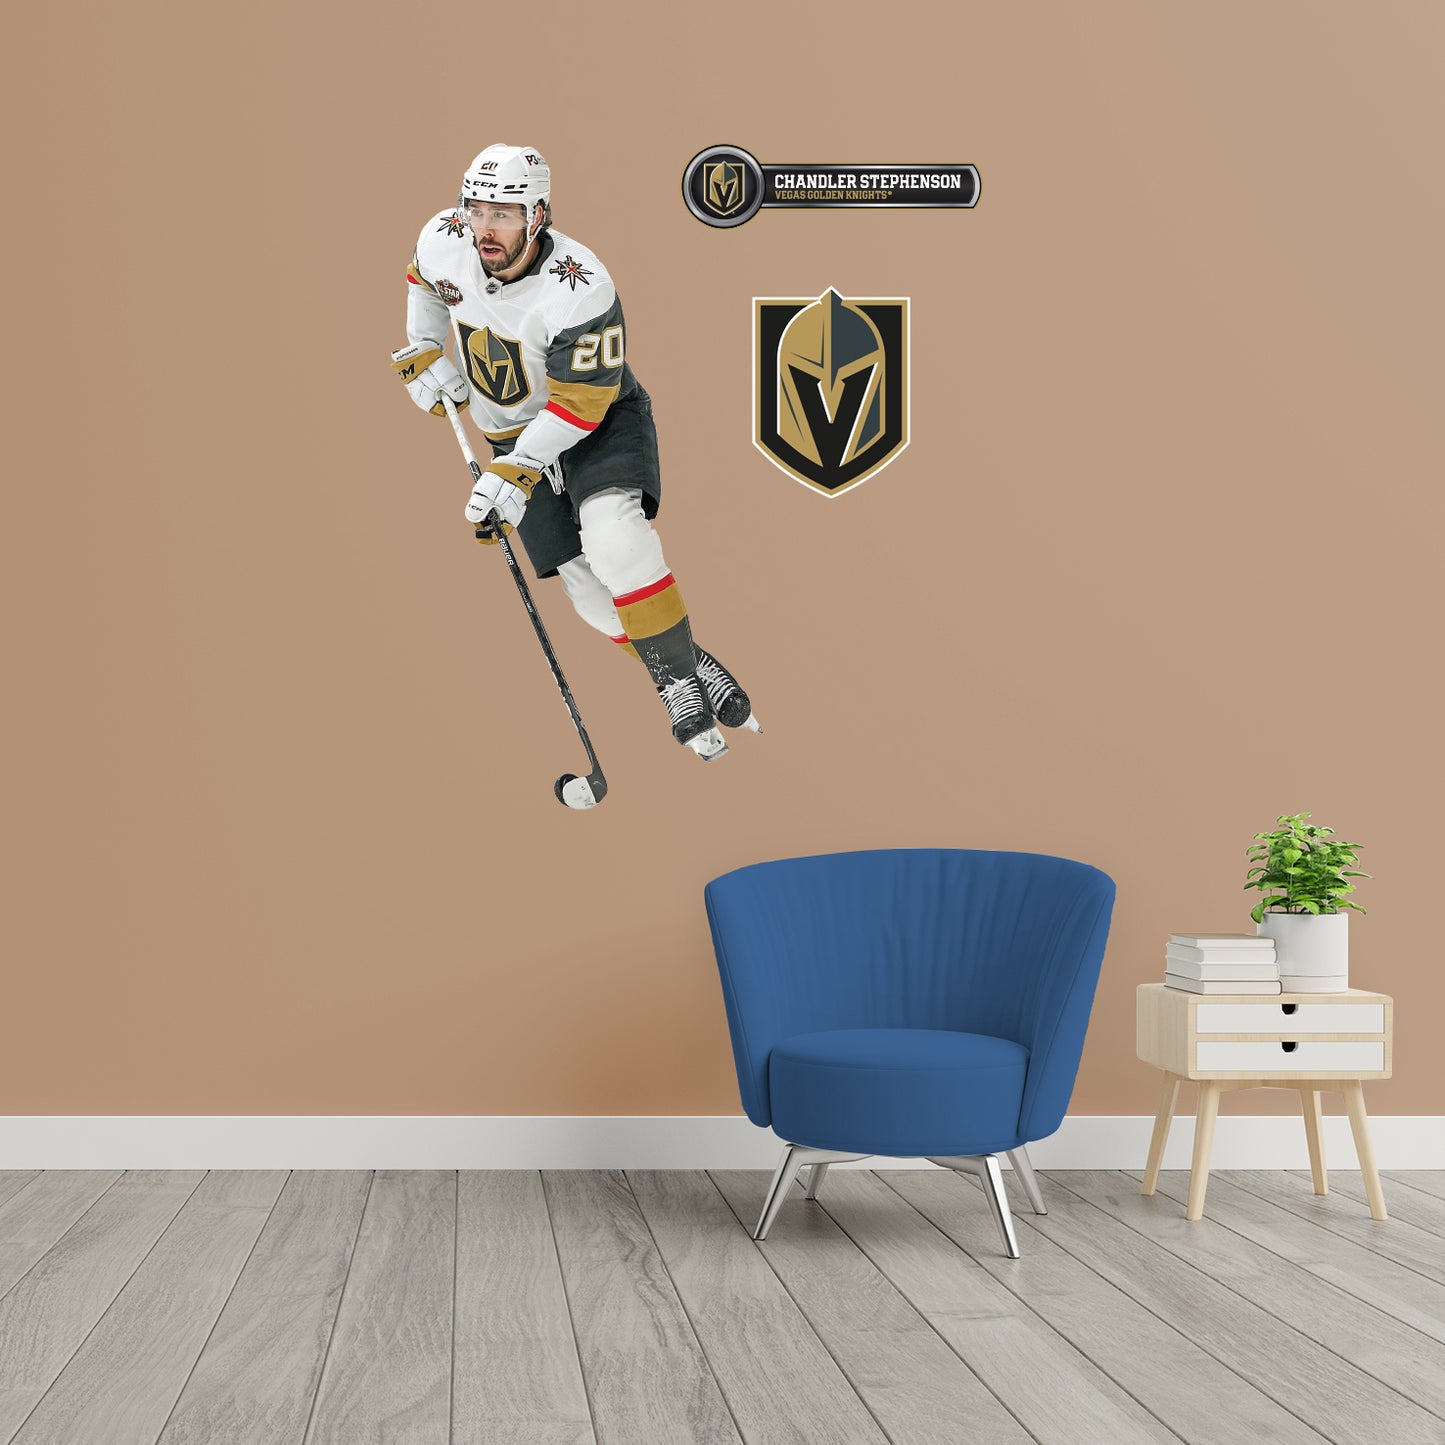 Vegas Golden Knights: Chandler Stephenson - Officially Licensed NHL Removable Adhesive Decal